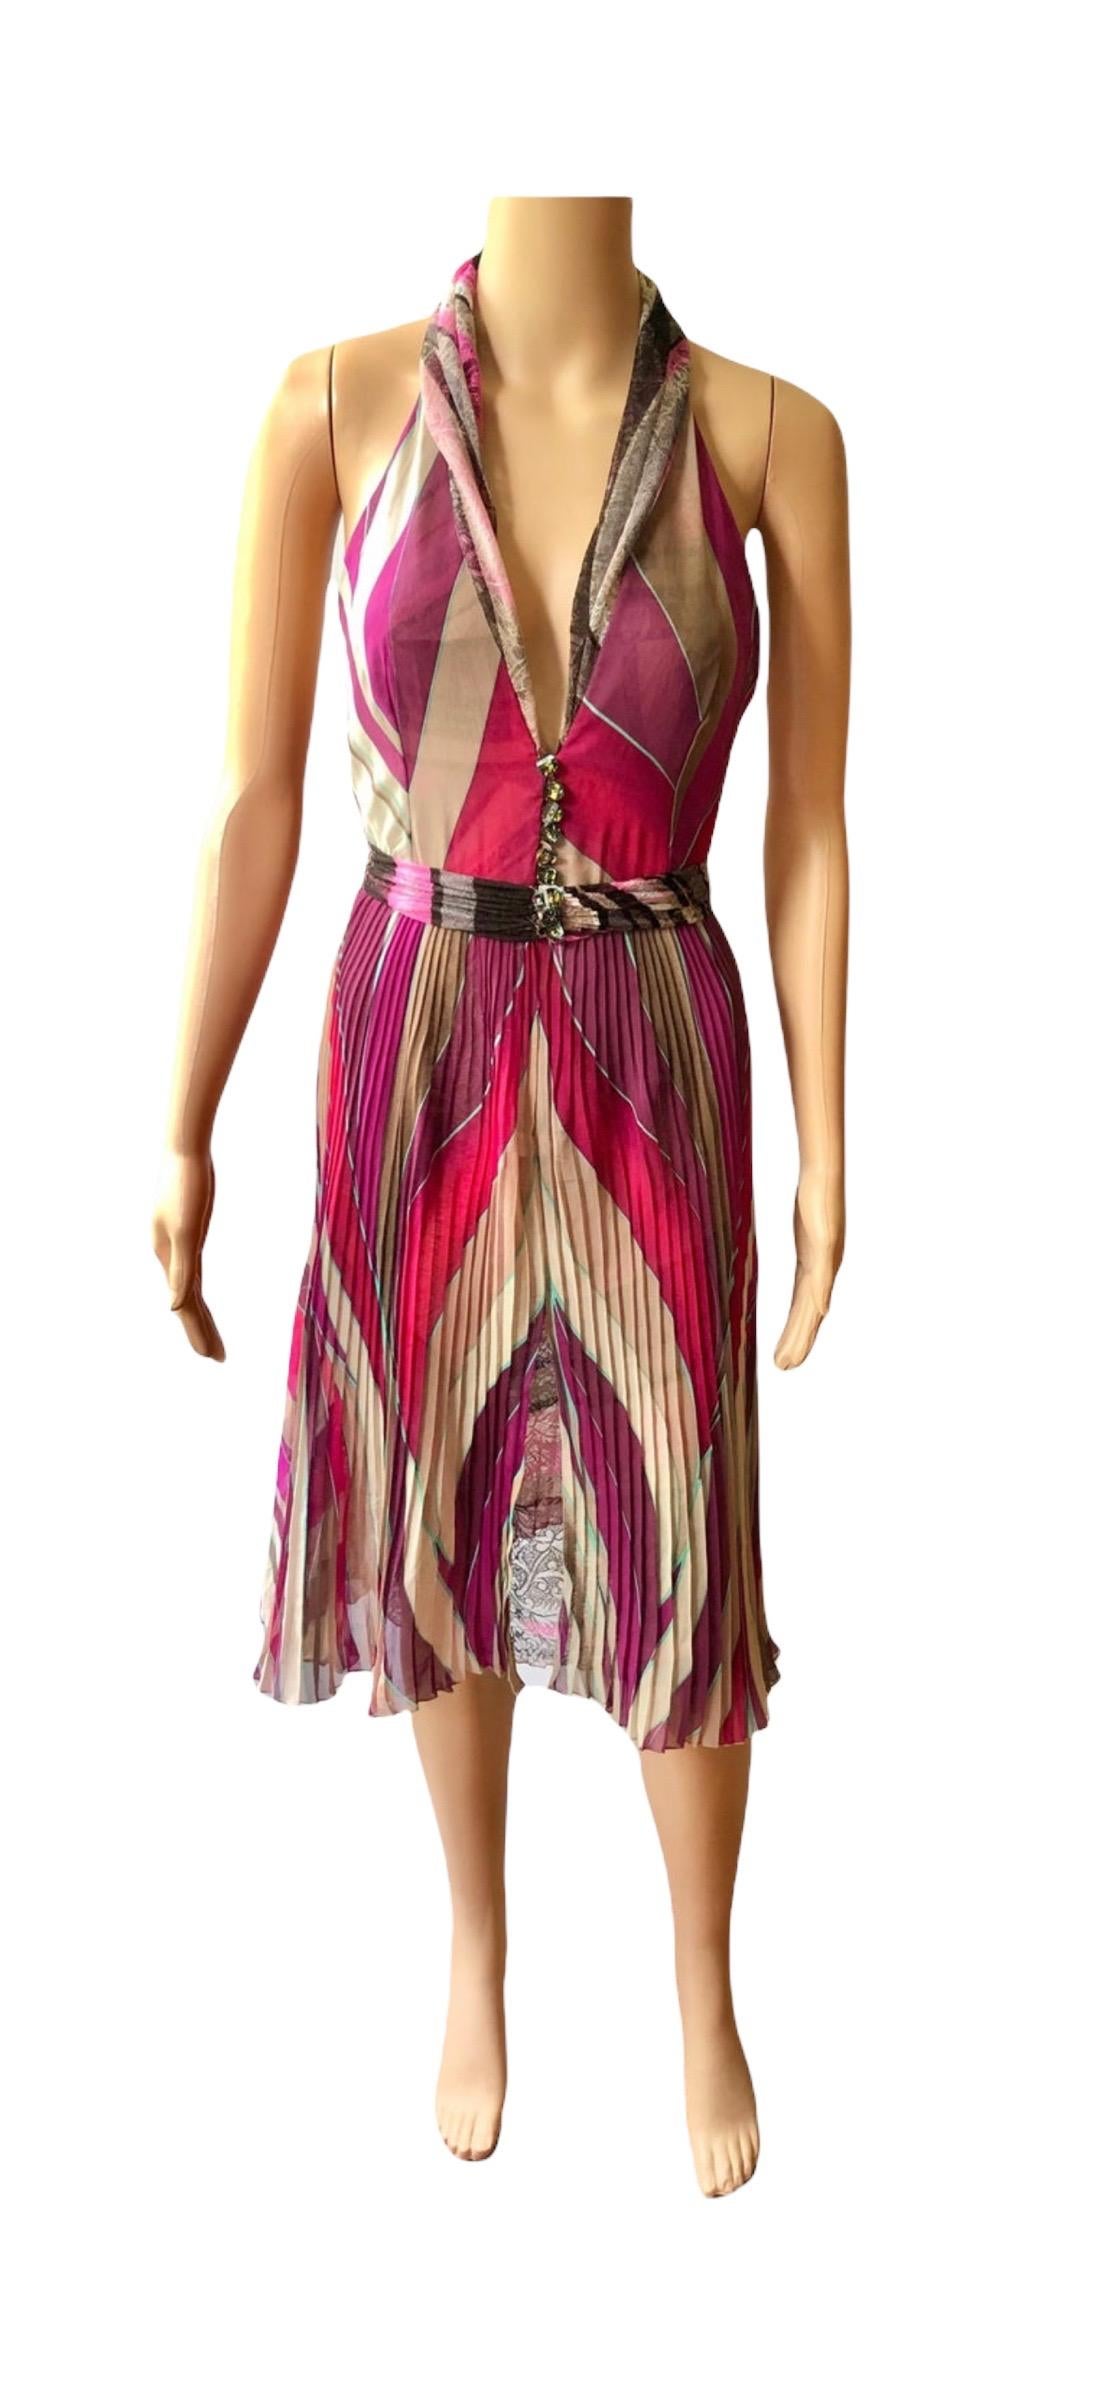 Gianni Versace F/W 2000 Runway Plunged Geometric Print Open Back Pleated Dress For Sale 6